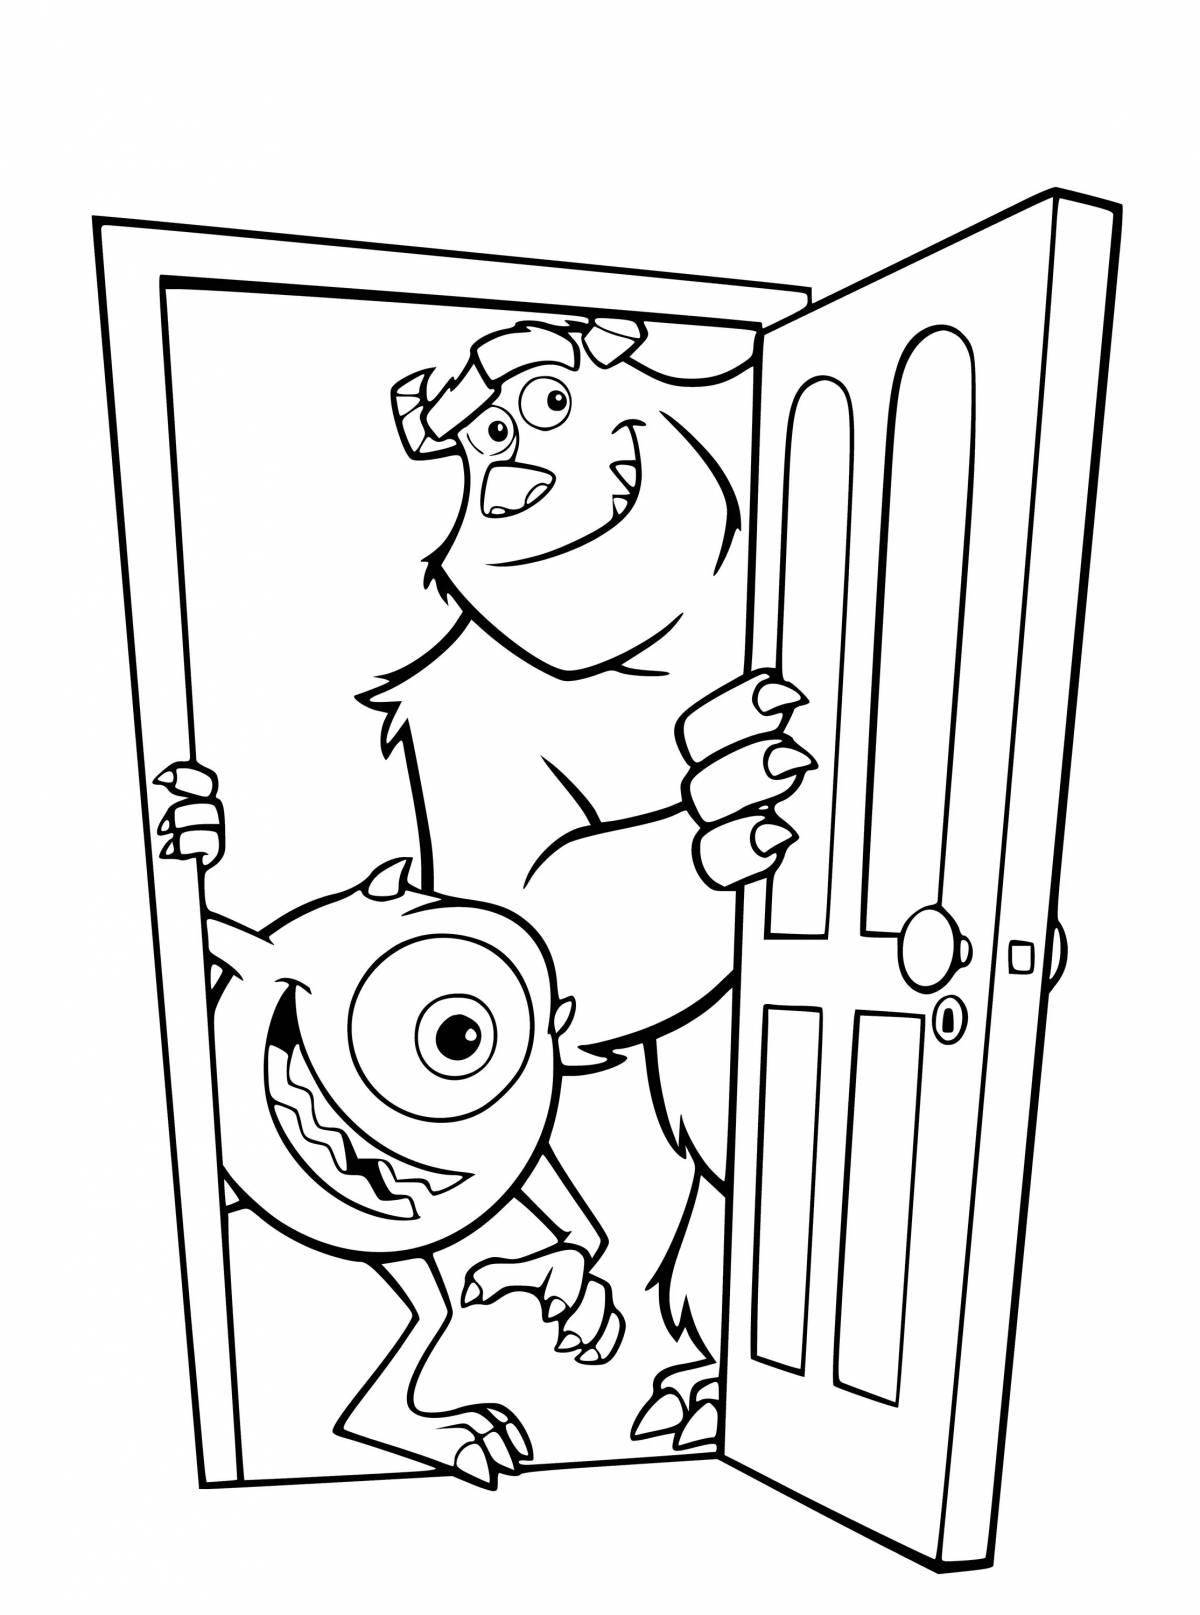 Adorable monsters corporation coloring page for kids